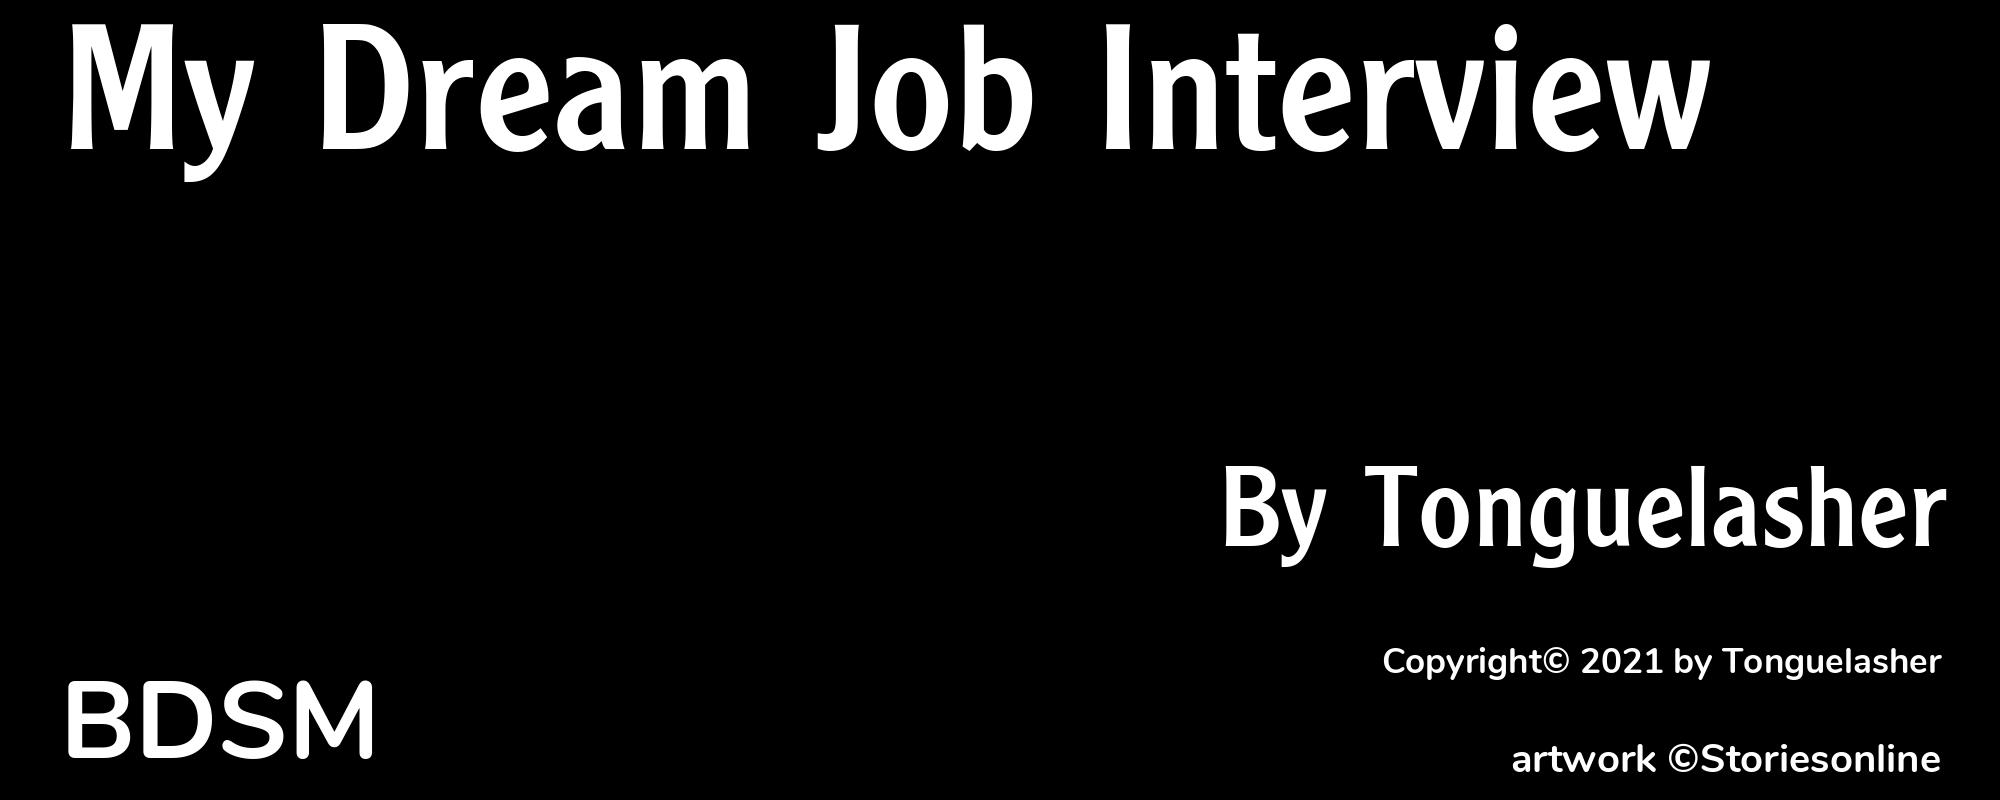 My Dream Job Interview - Cover